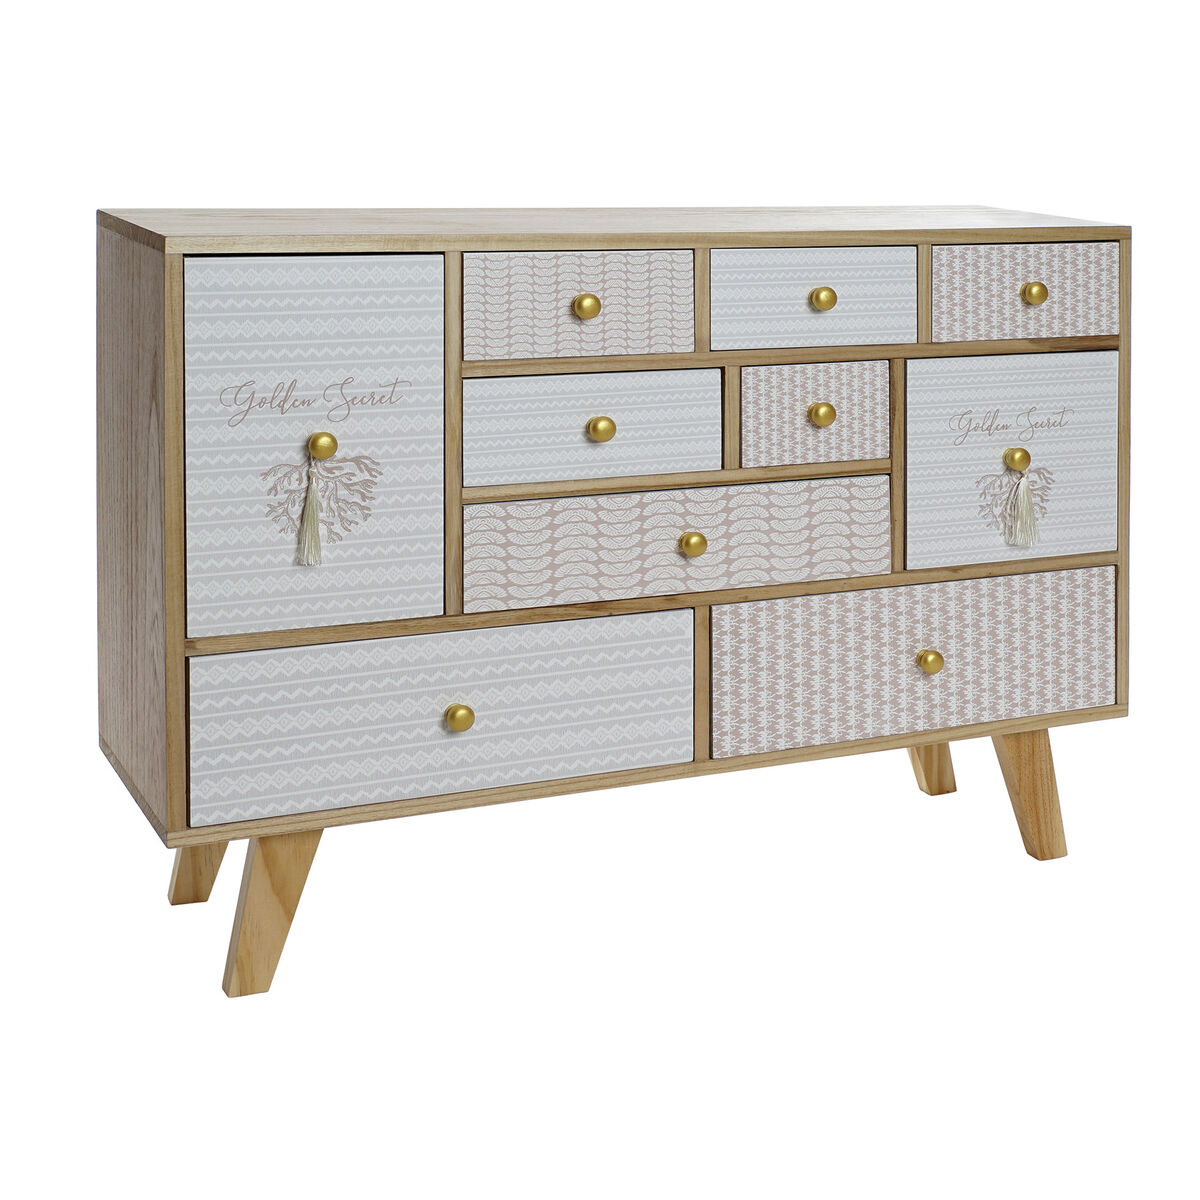 Sideboard DKD Home Decor 95 x 26 x 67,5 cm Natural Paolownia wood